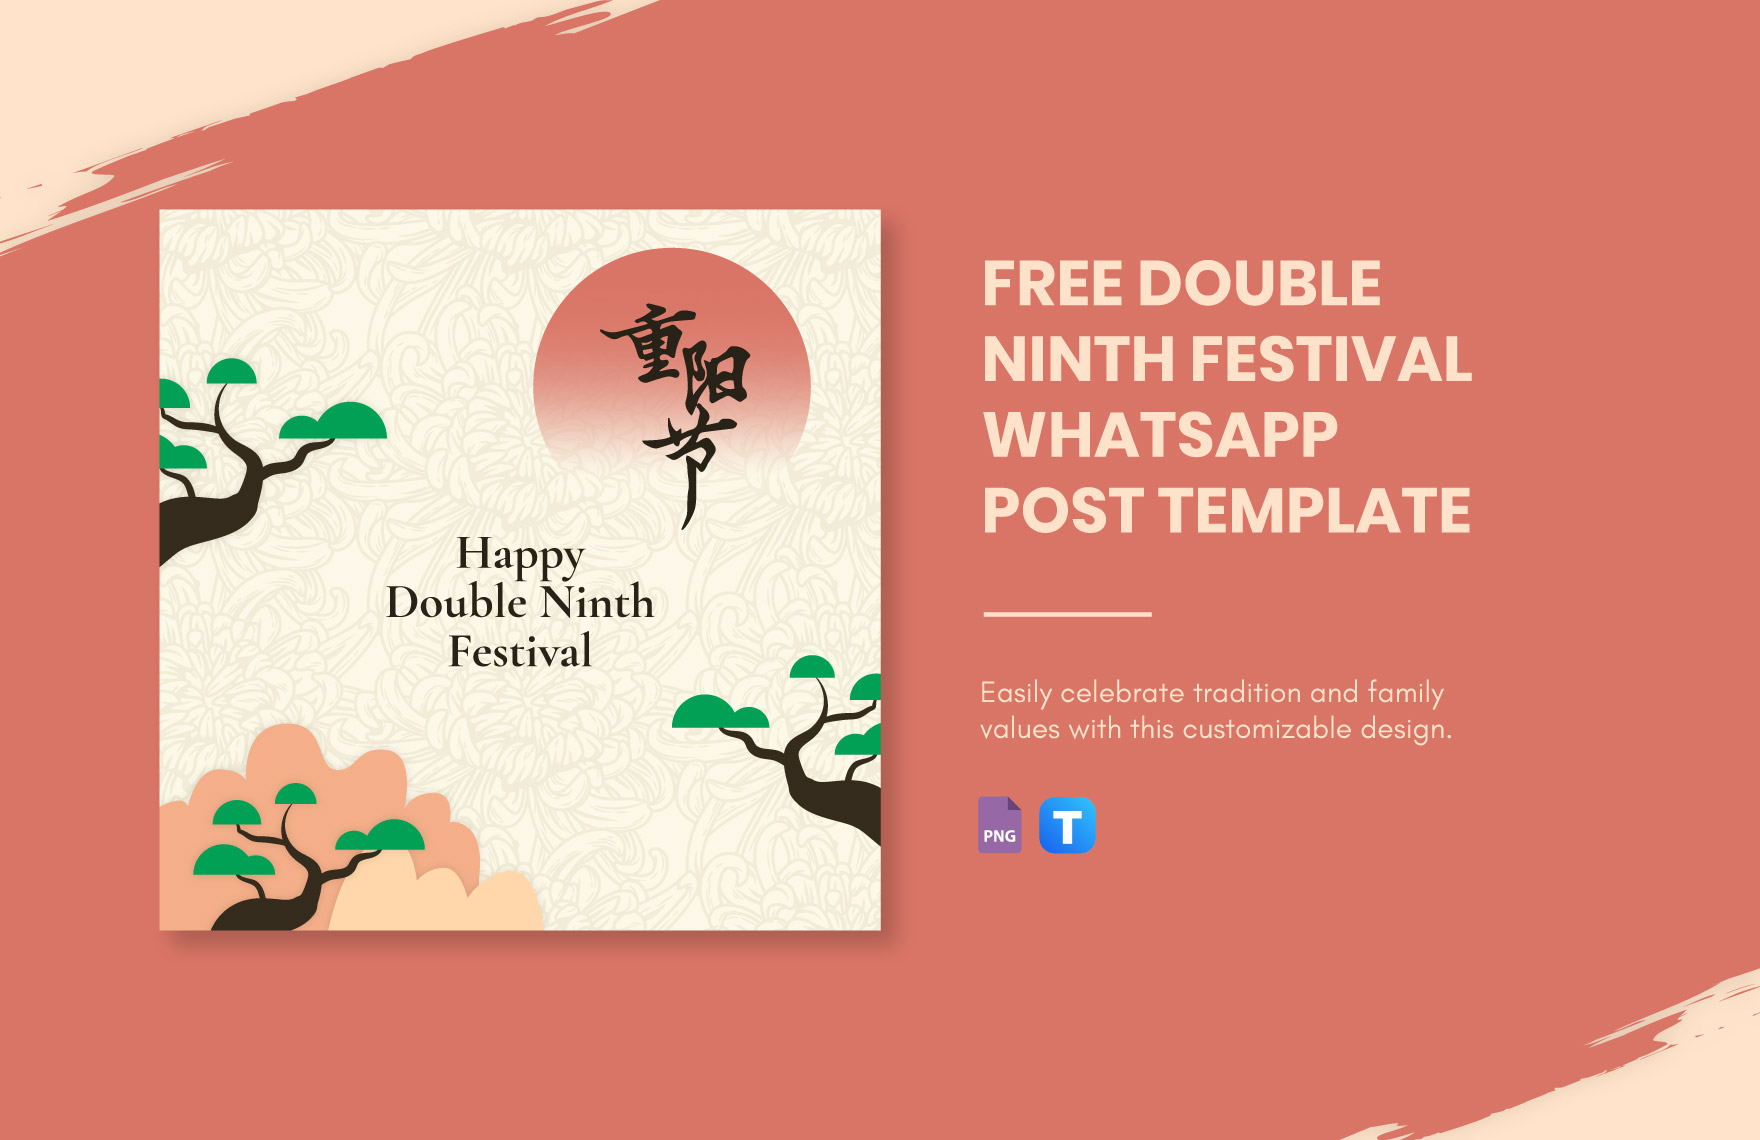 Free Double Ninth Festival WhatsApp Post Template